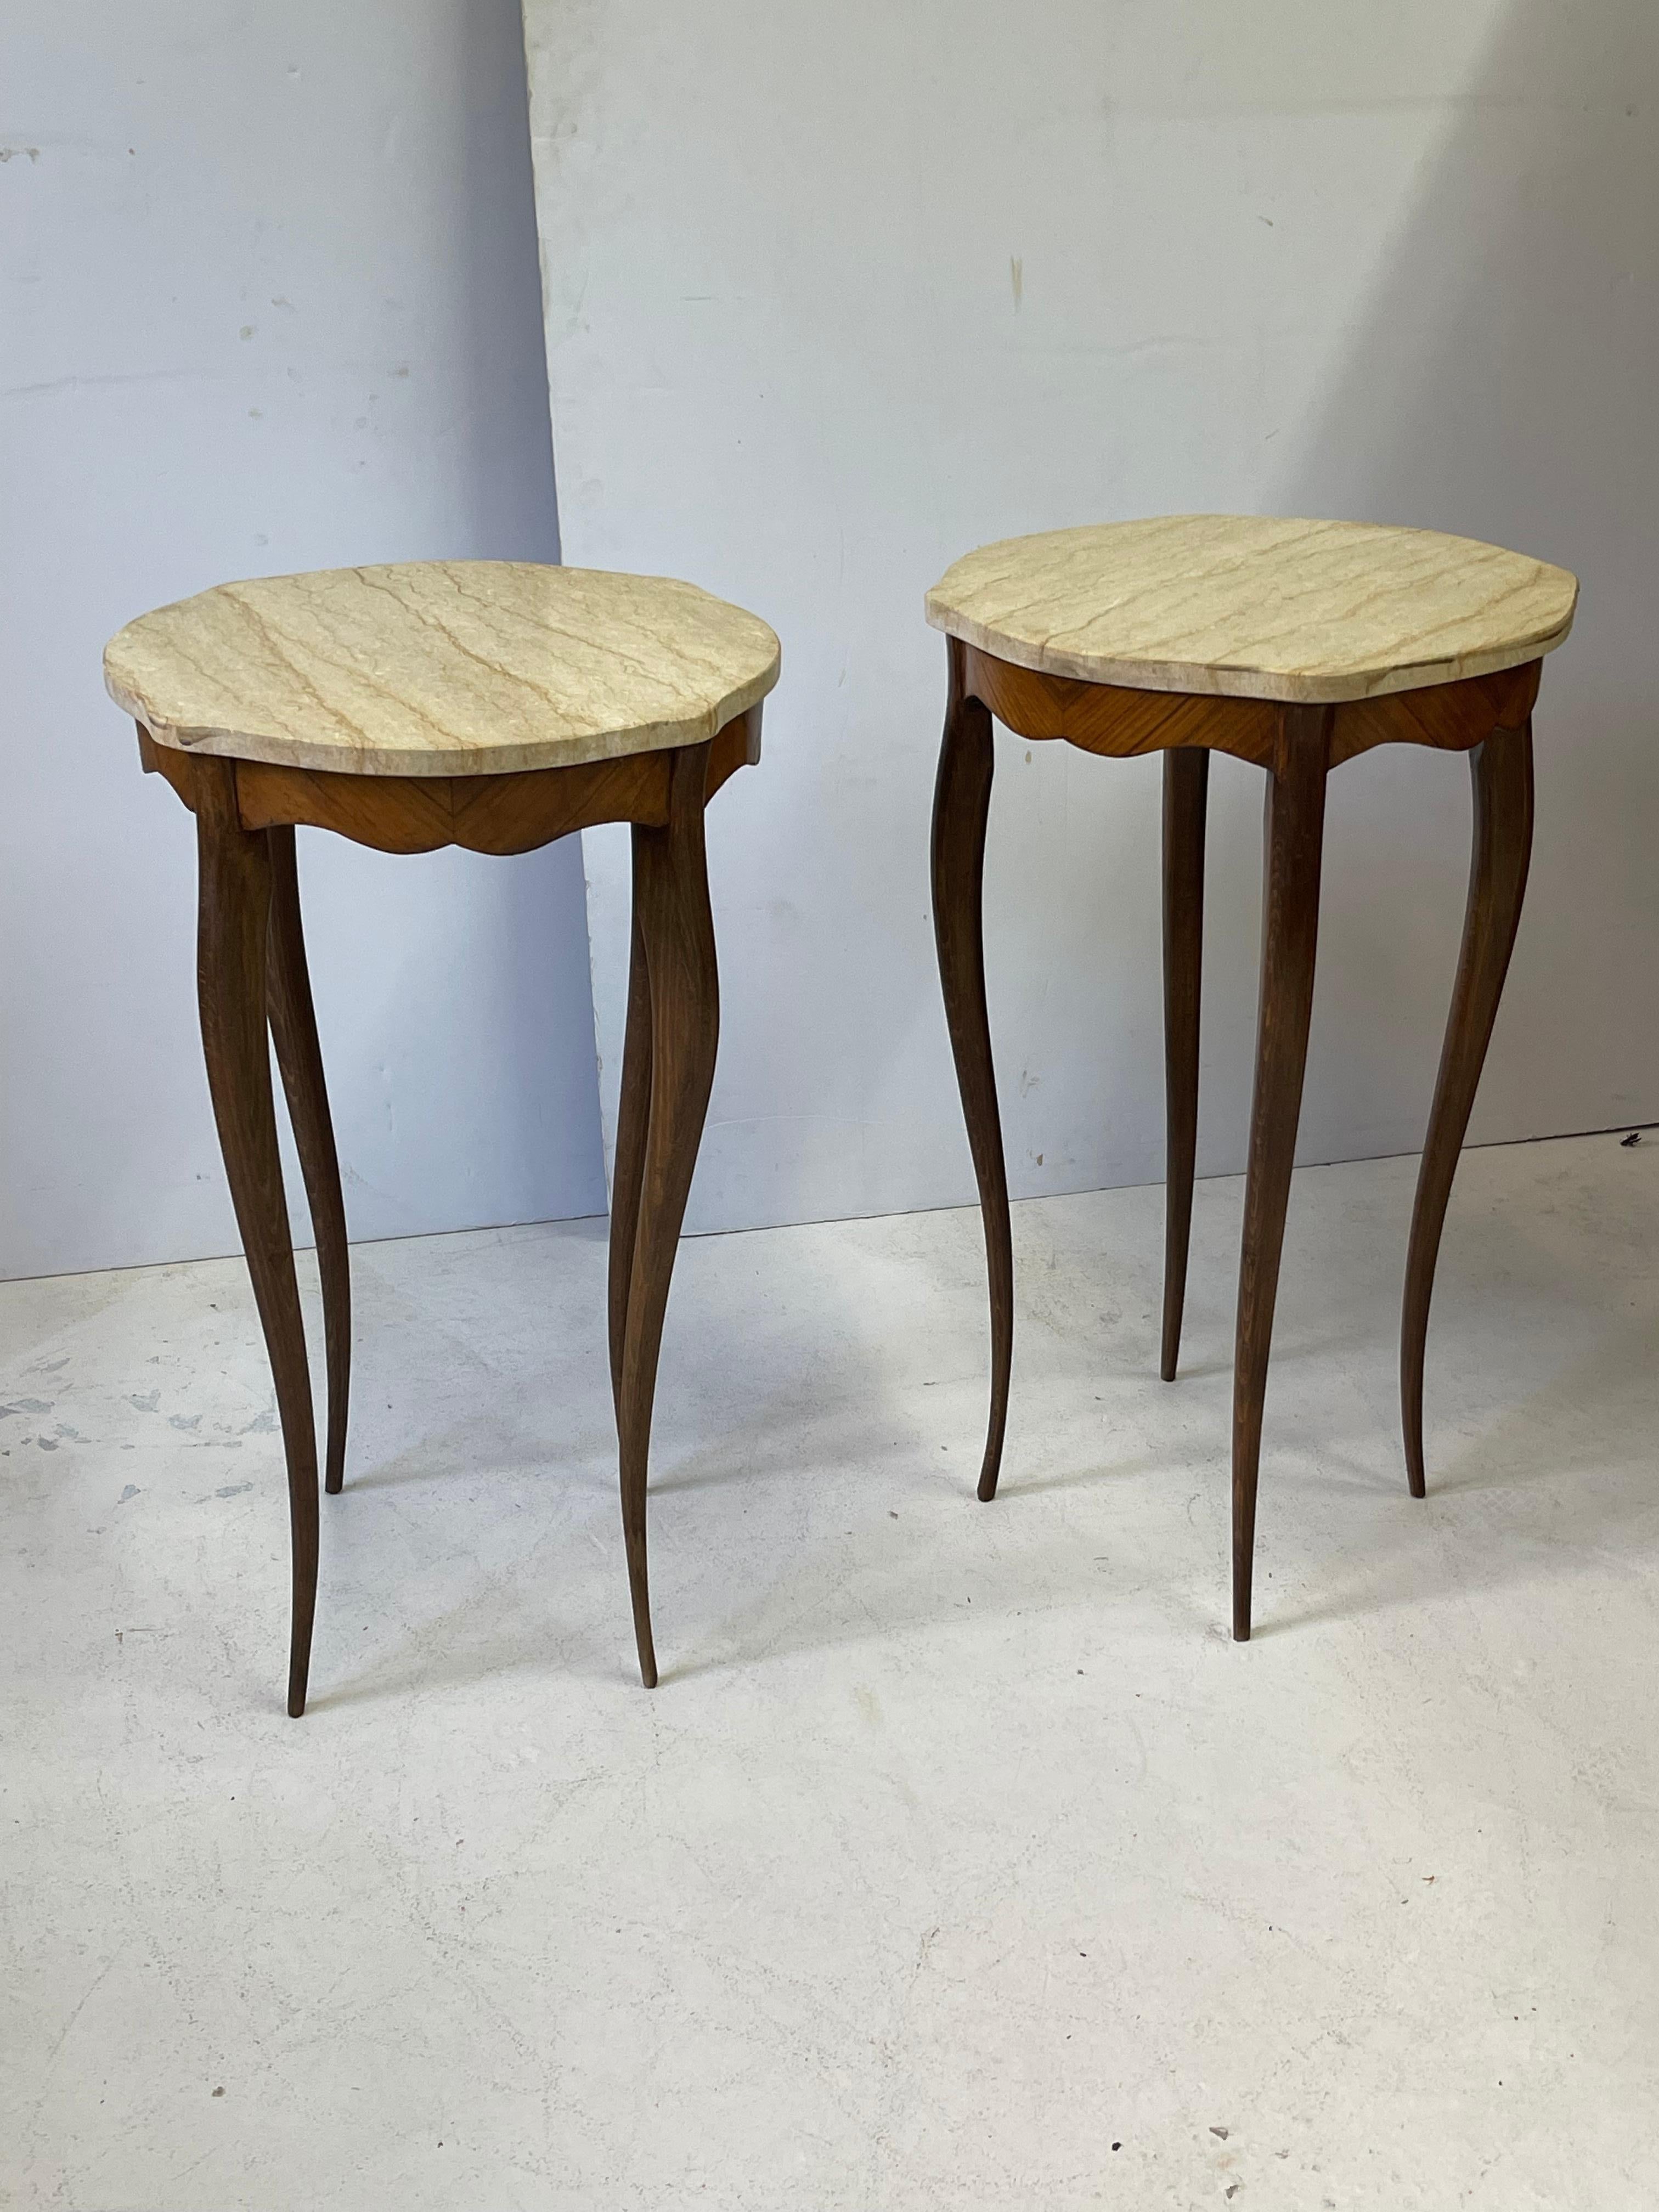 20th Century Pair of Italian Art Nouveau Side Tables or Plant Stands